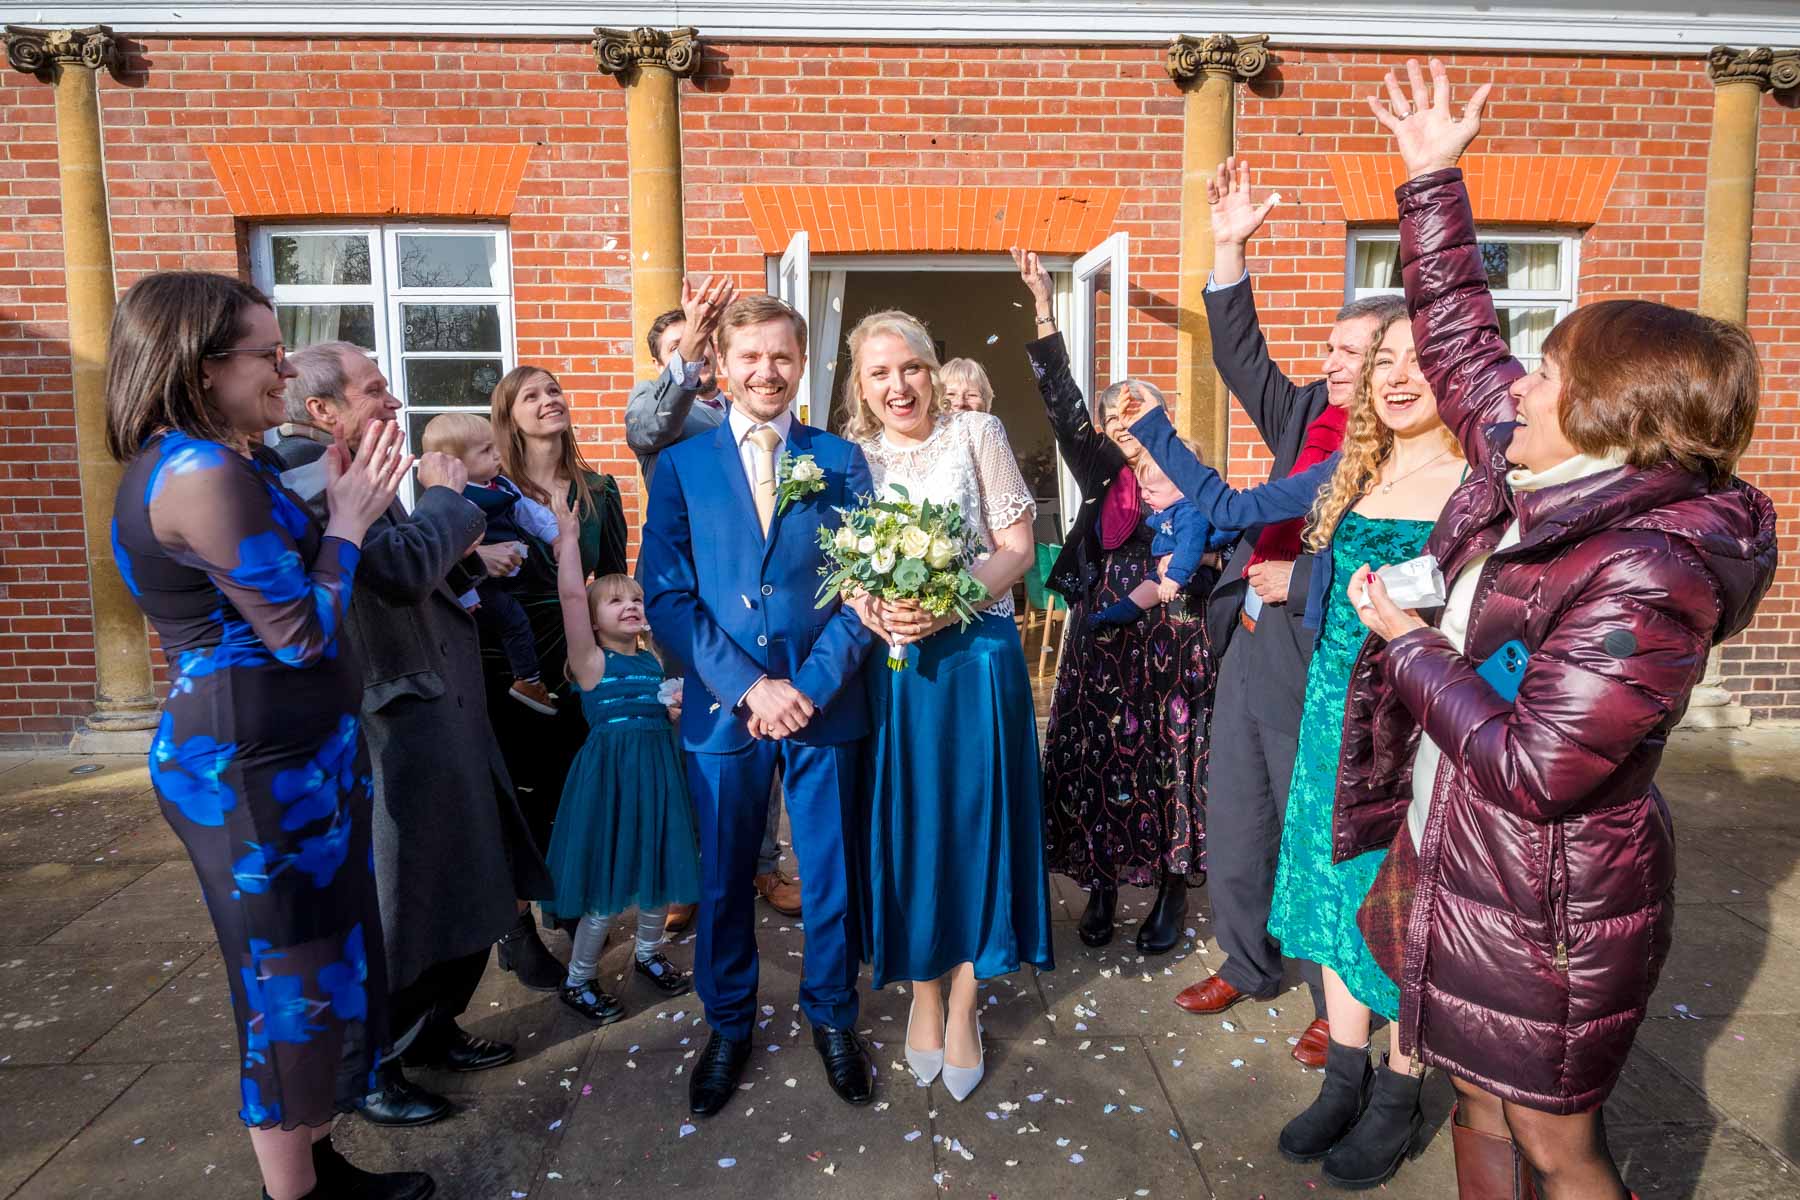 Guests throw confetti over newlyweds as they leave the Loggia Room in York House, Twickenham.